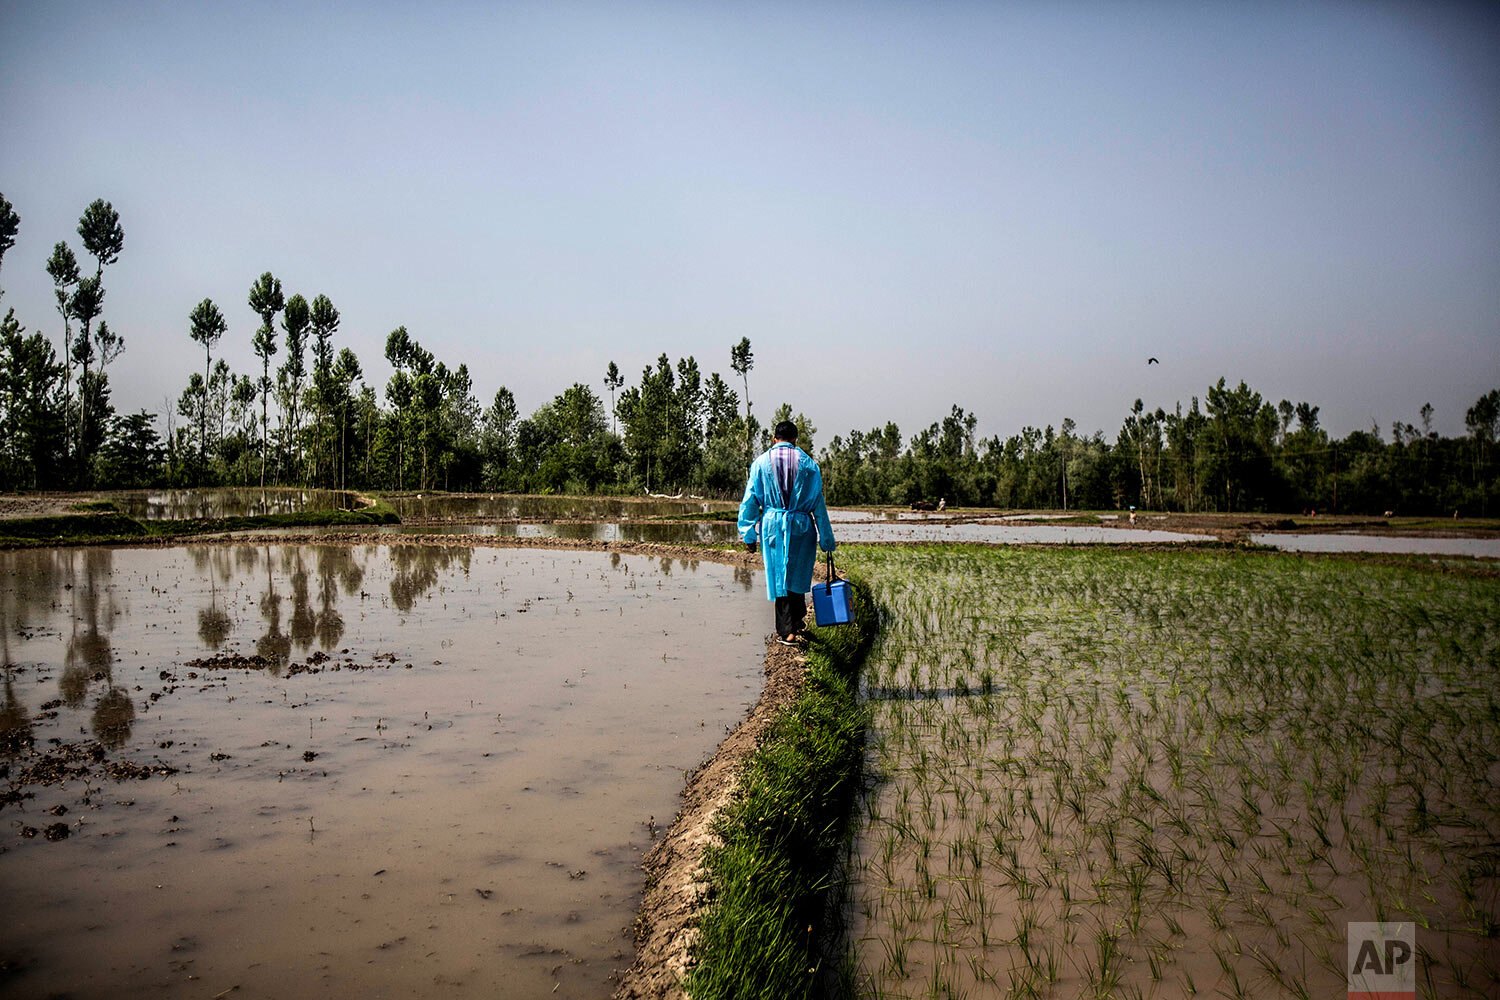  A health worker crosses a paddy field during a vaccination drive against COVID-19 in Minnar village, north of Srinagar, Indian controlled Kashmir, Thursday, June 10, 2021. (AP Photo/Mukhtar Khan) 